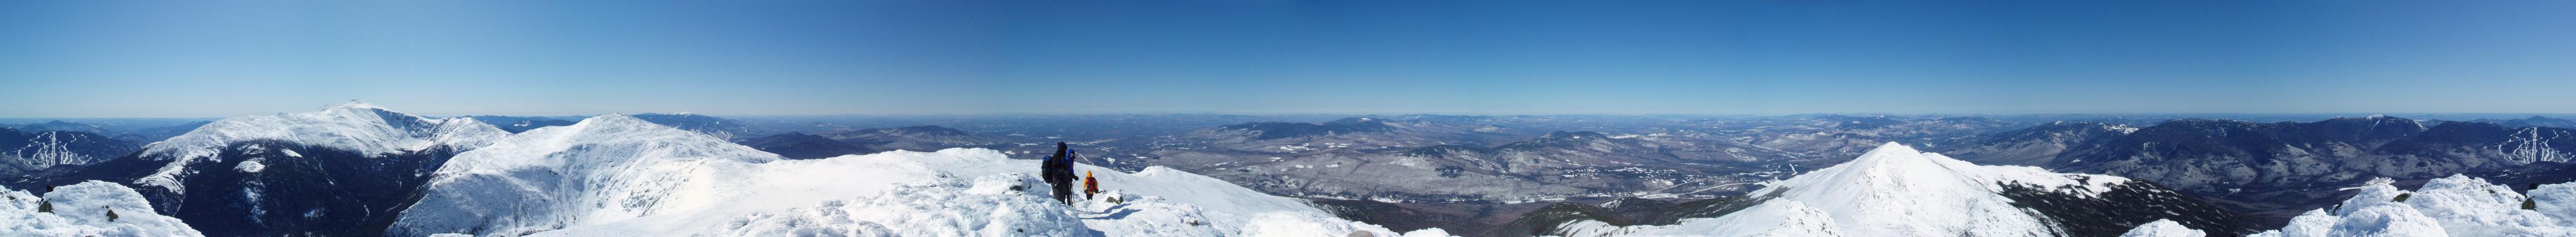 360-degree winter view from the summit of Mount Adams in NH on March 2010